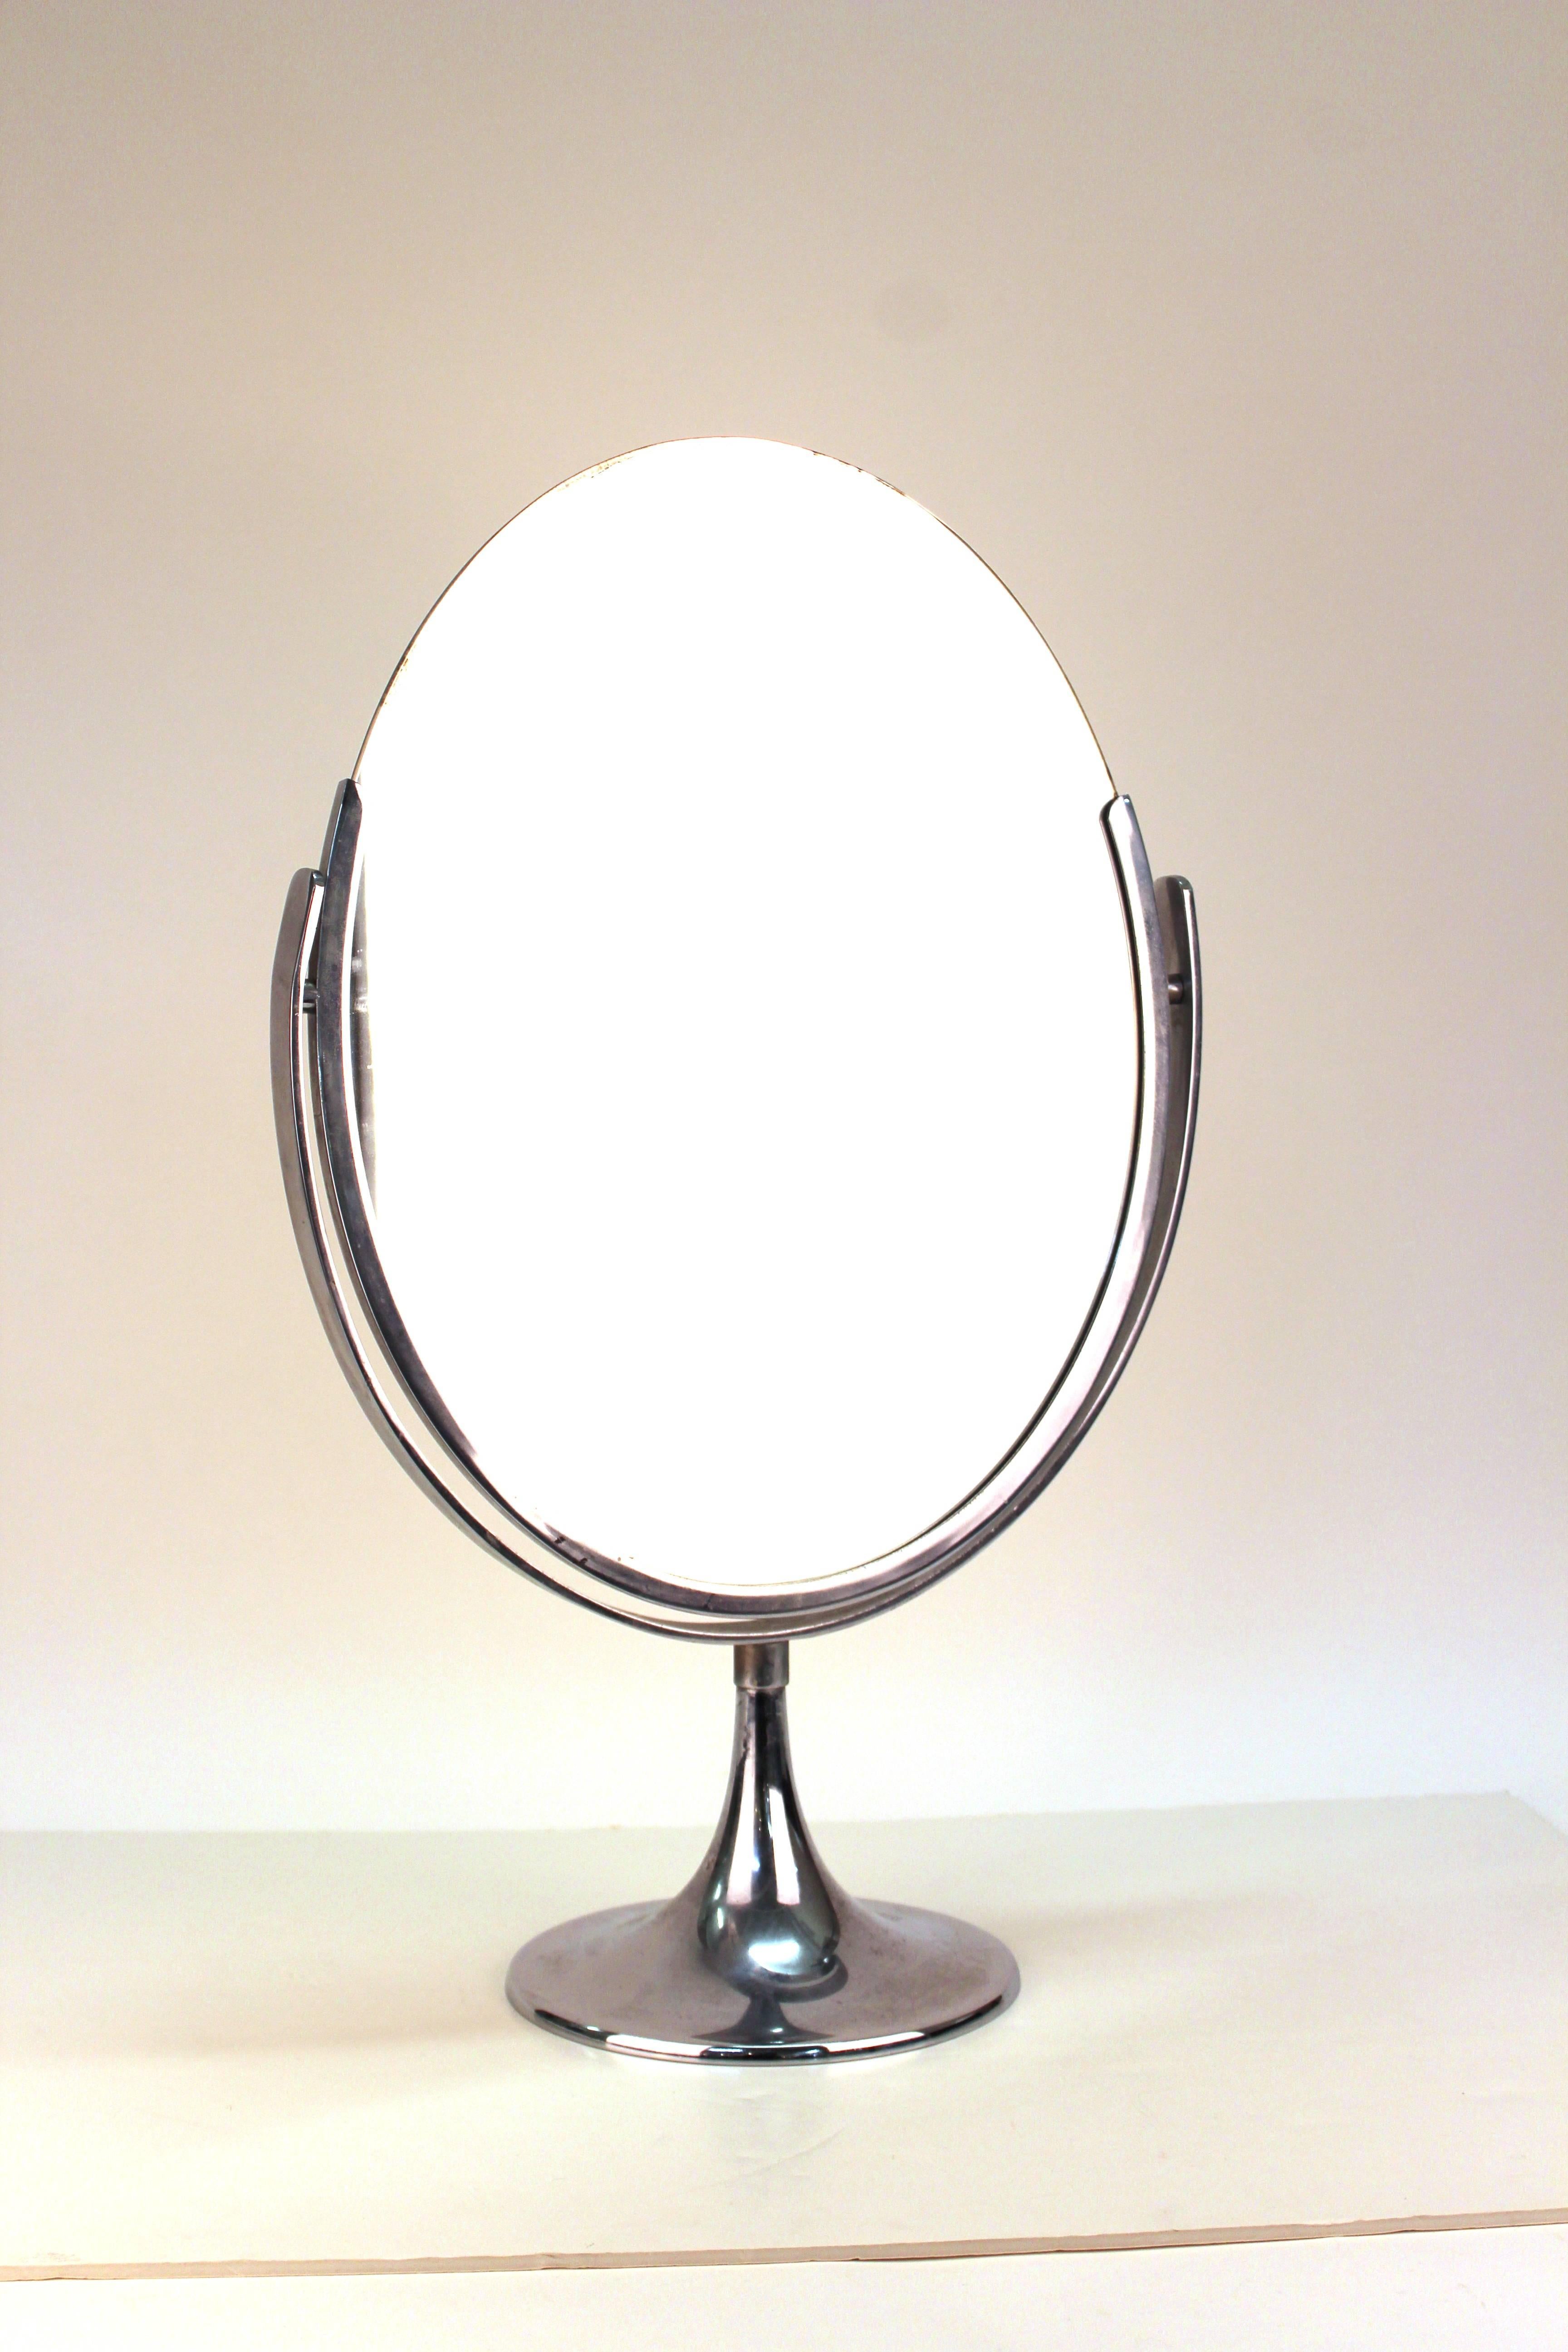 A Mid-century modern oval counter-top vanity mirror with a chrome base. The piece was made in the United States during the 1950's and is in great vintage condition.